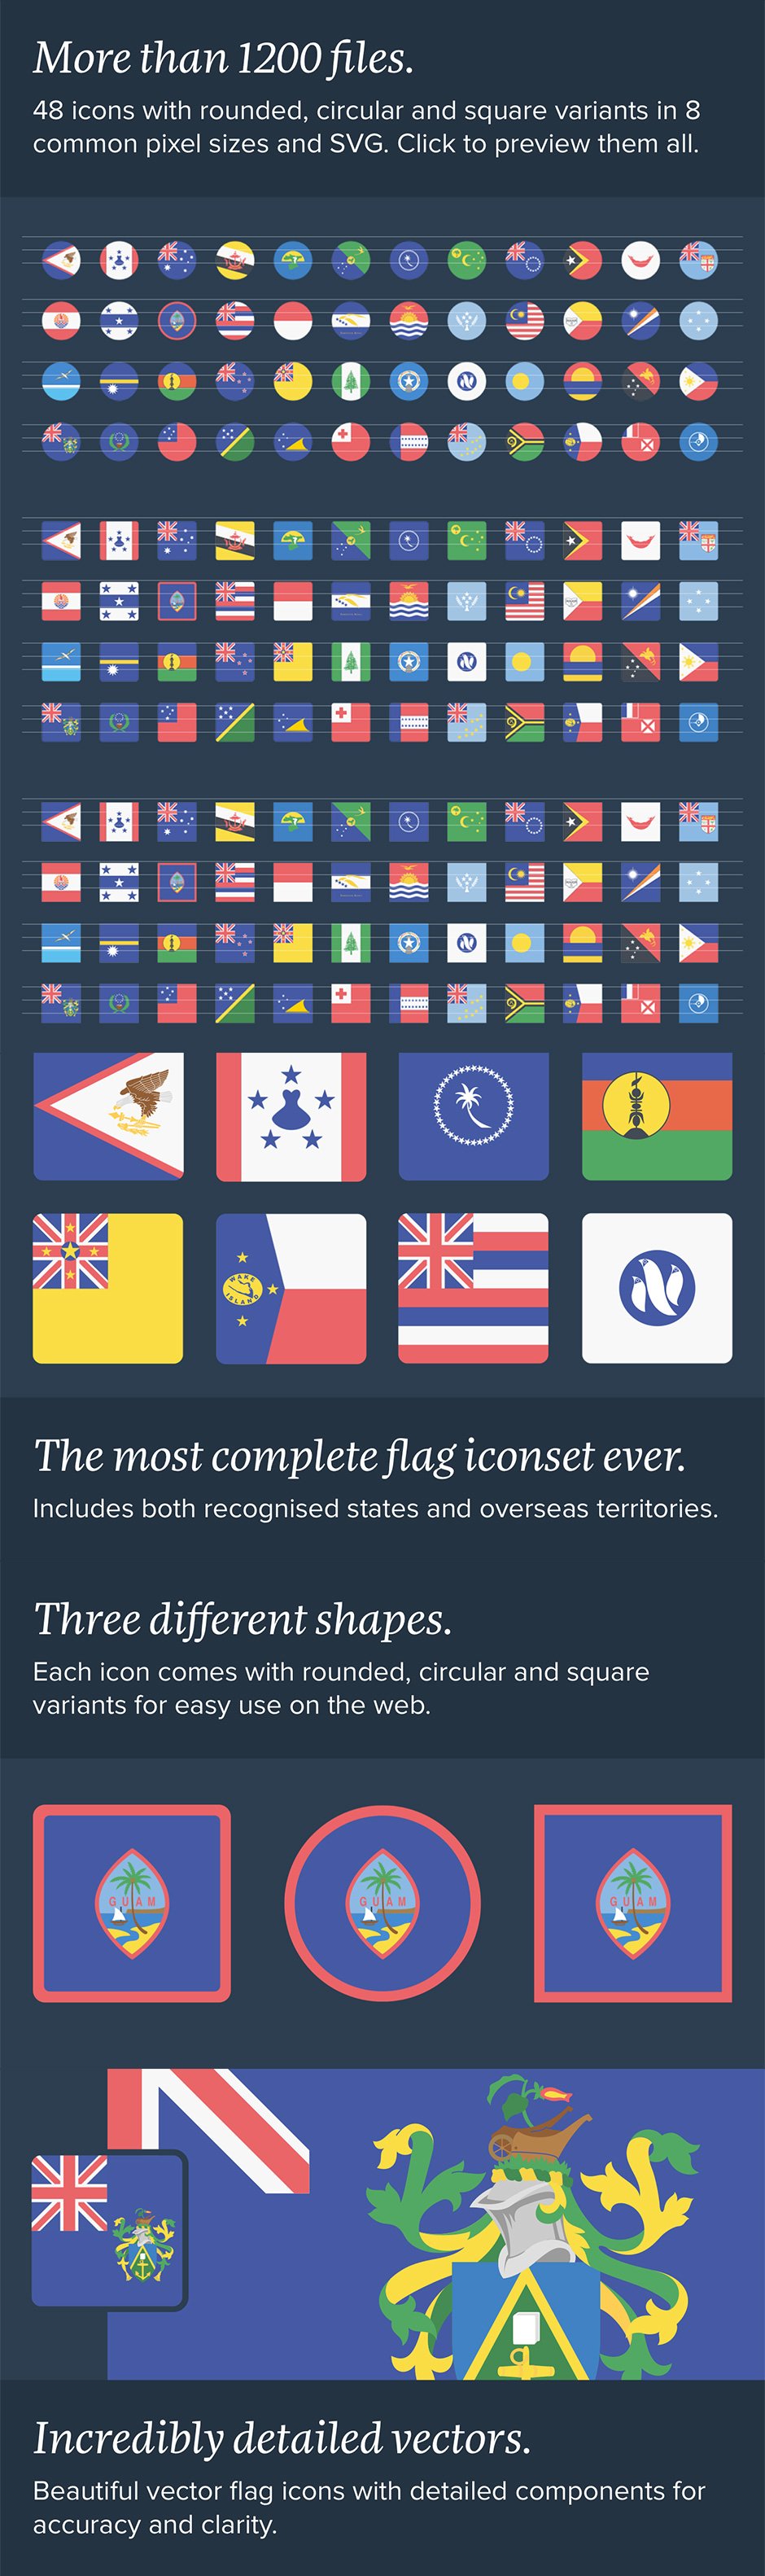 The Flags of Oceania Icon Set